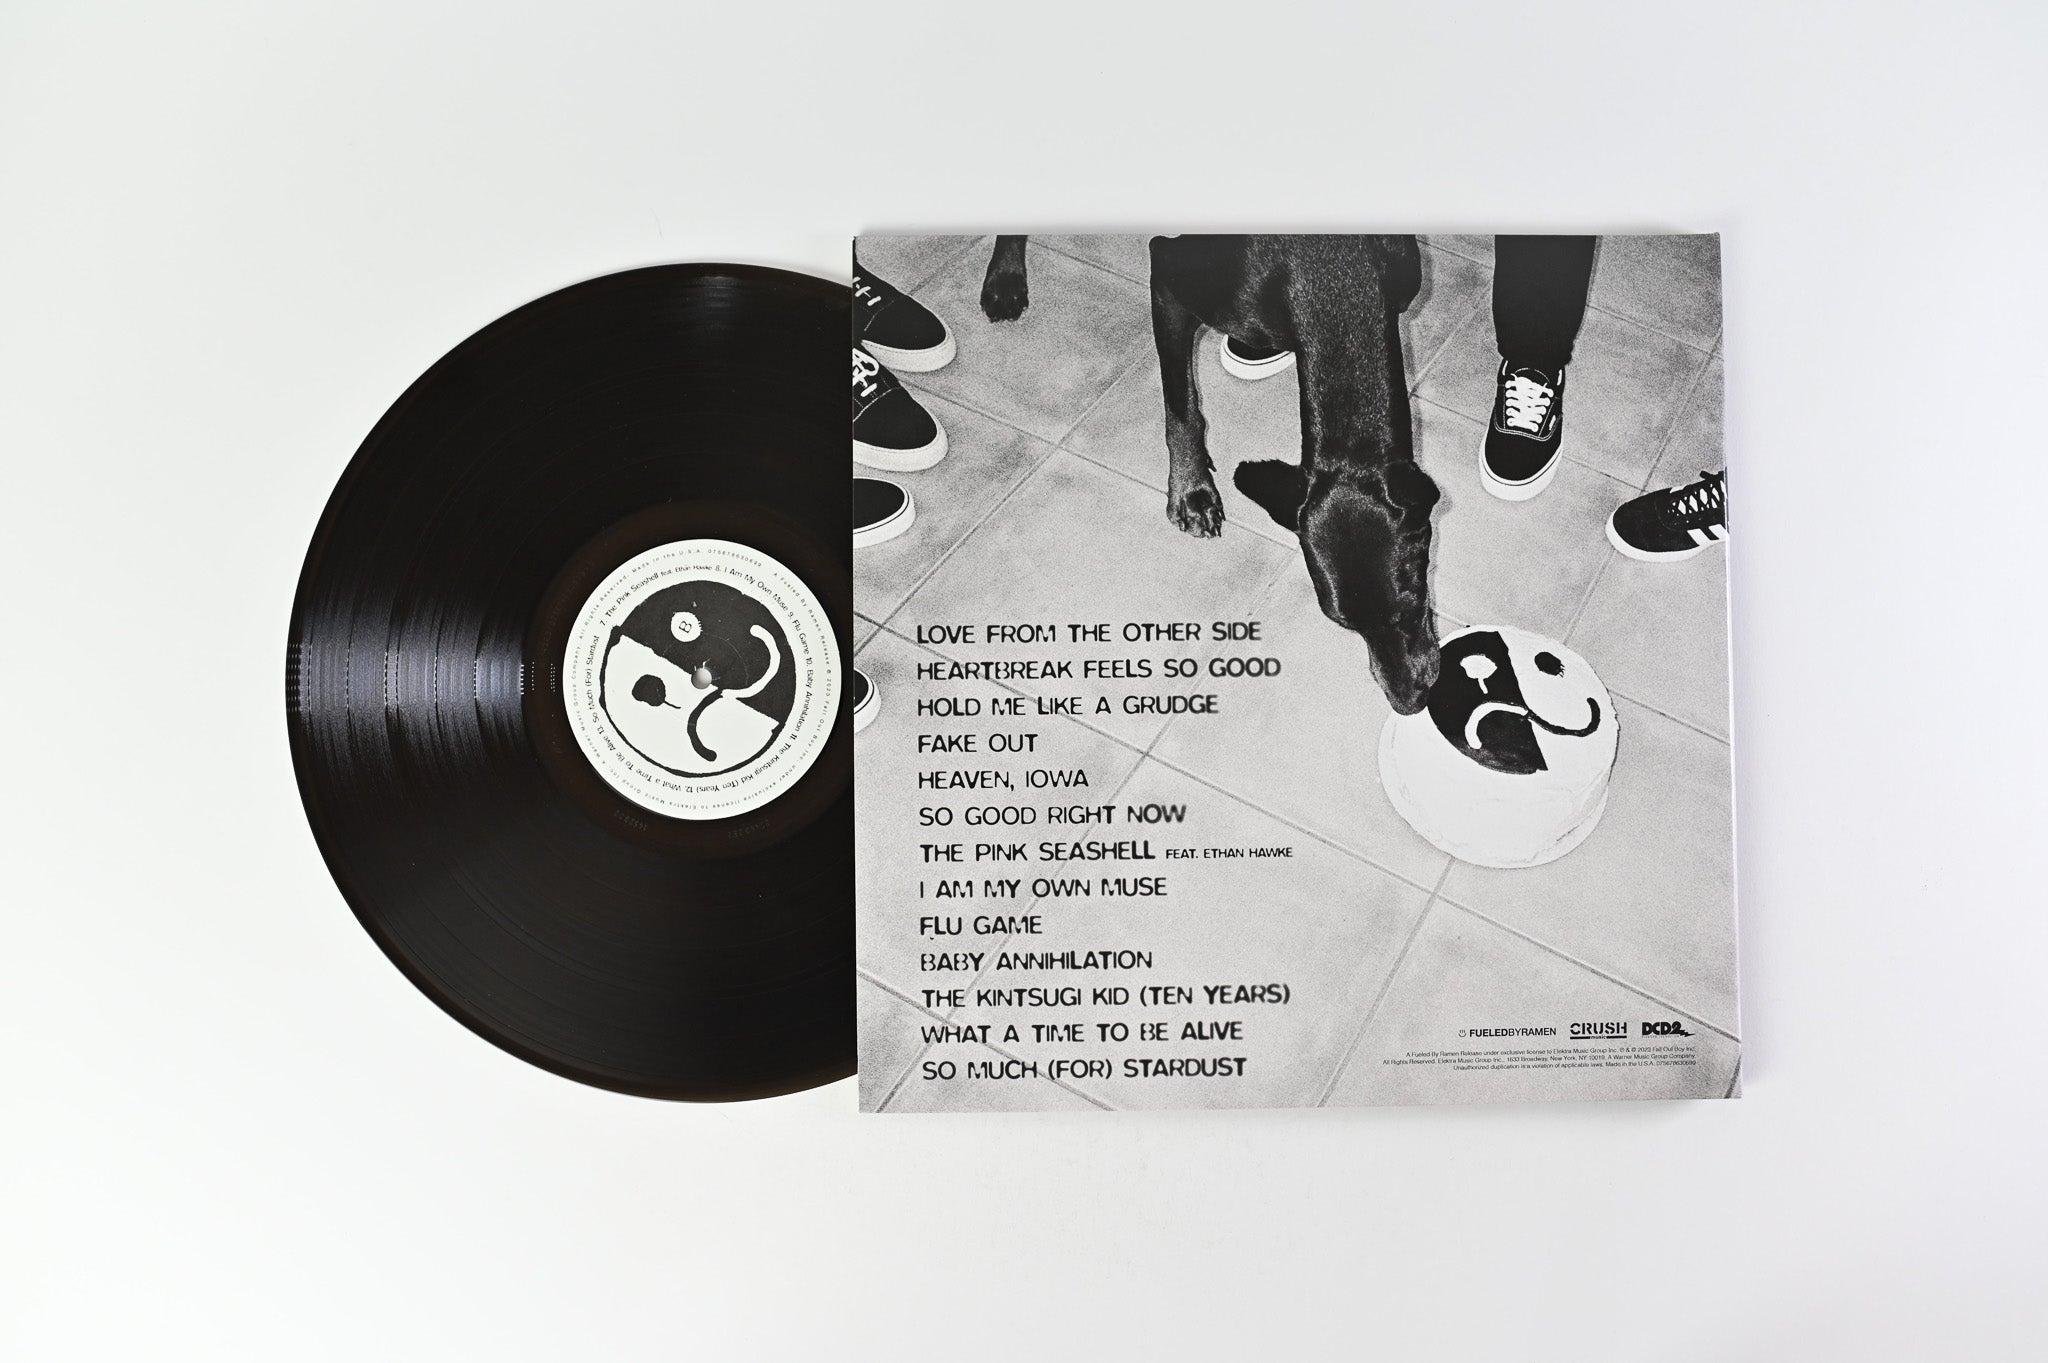 Fall Out Boy - So Much (For) Stardust on Fueled By Ramen Ltd Black Ice Vinyl